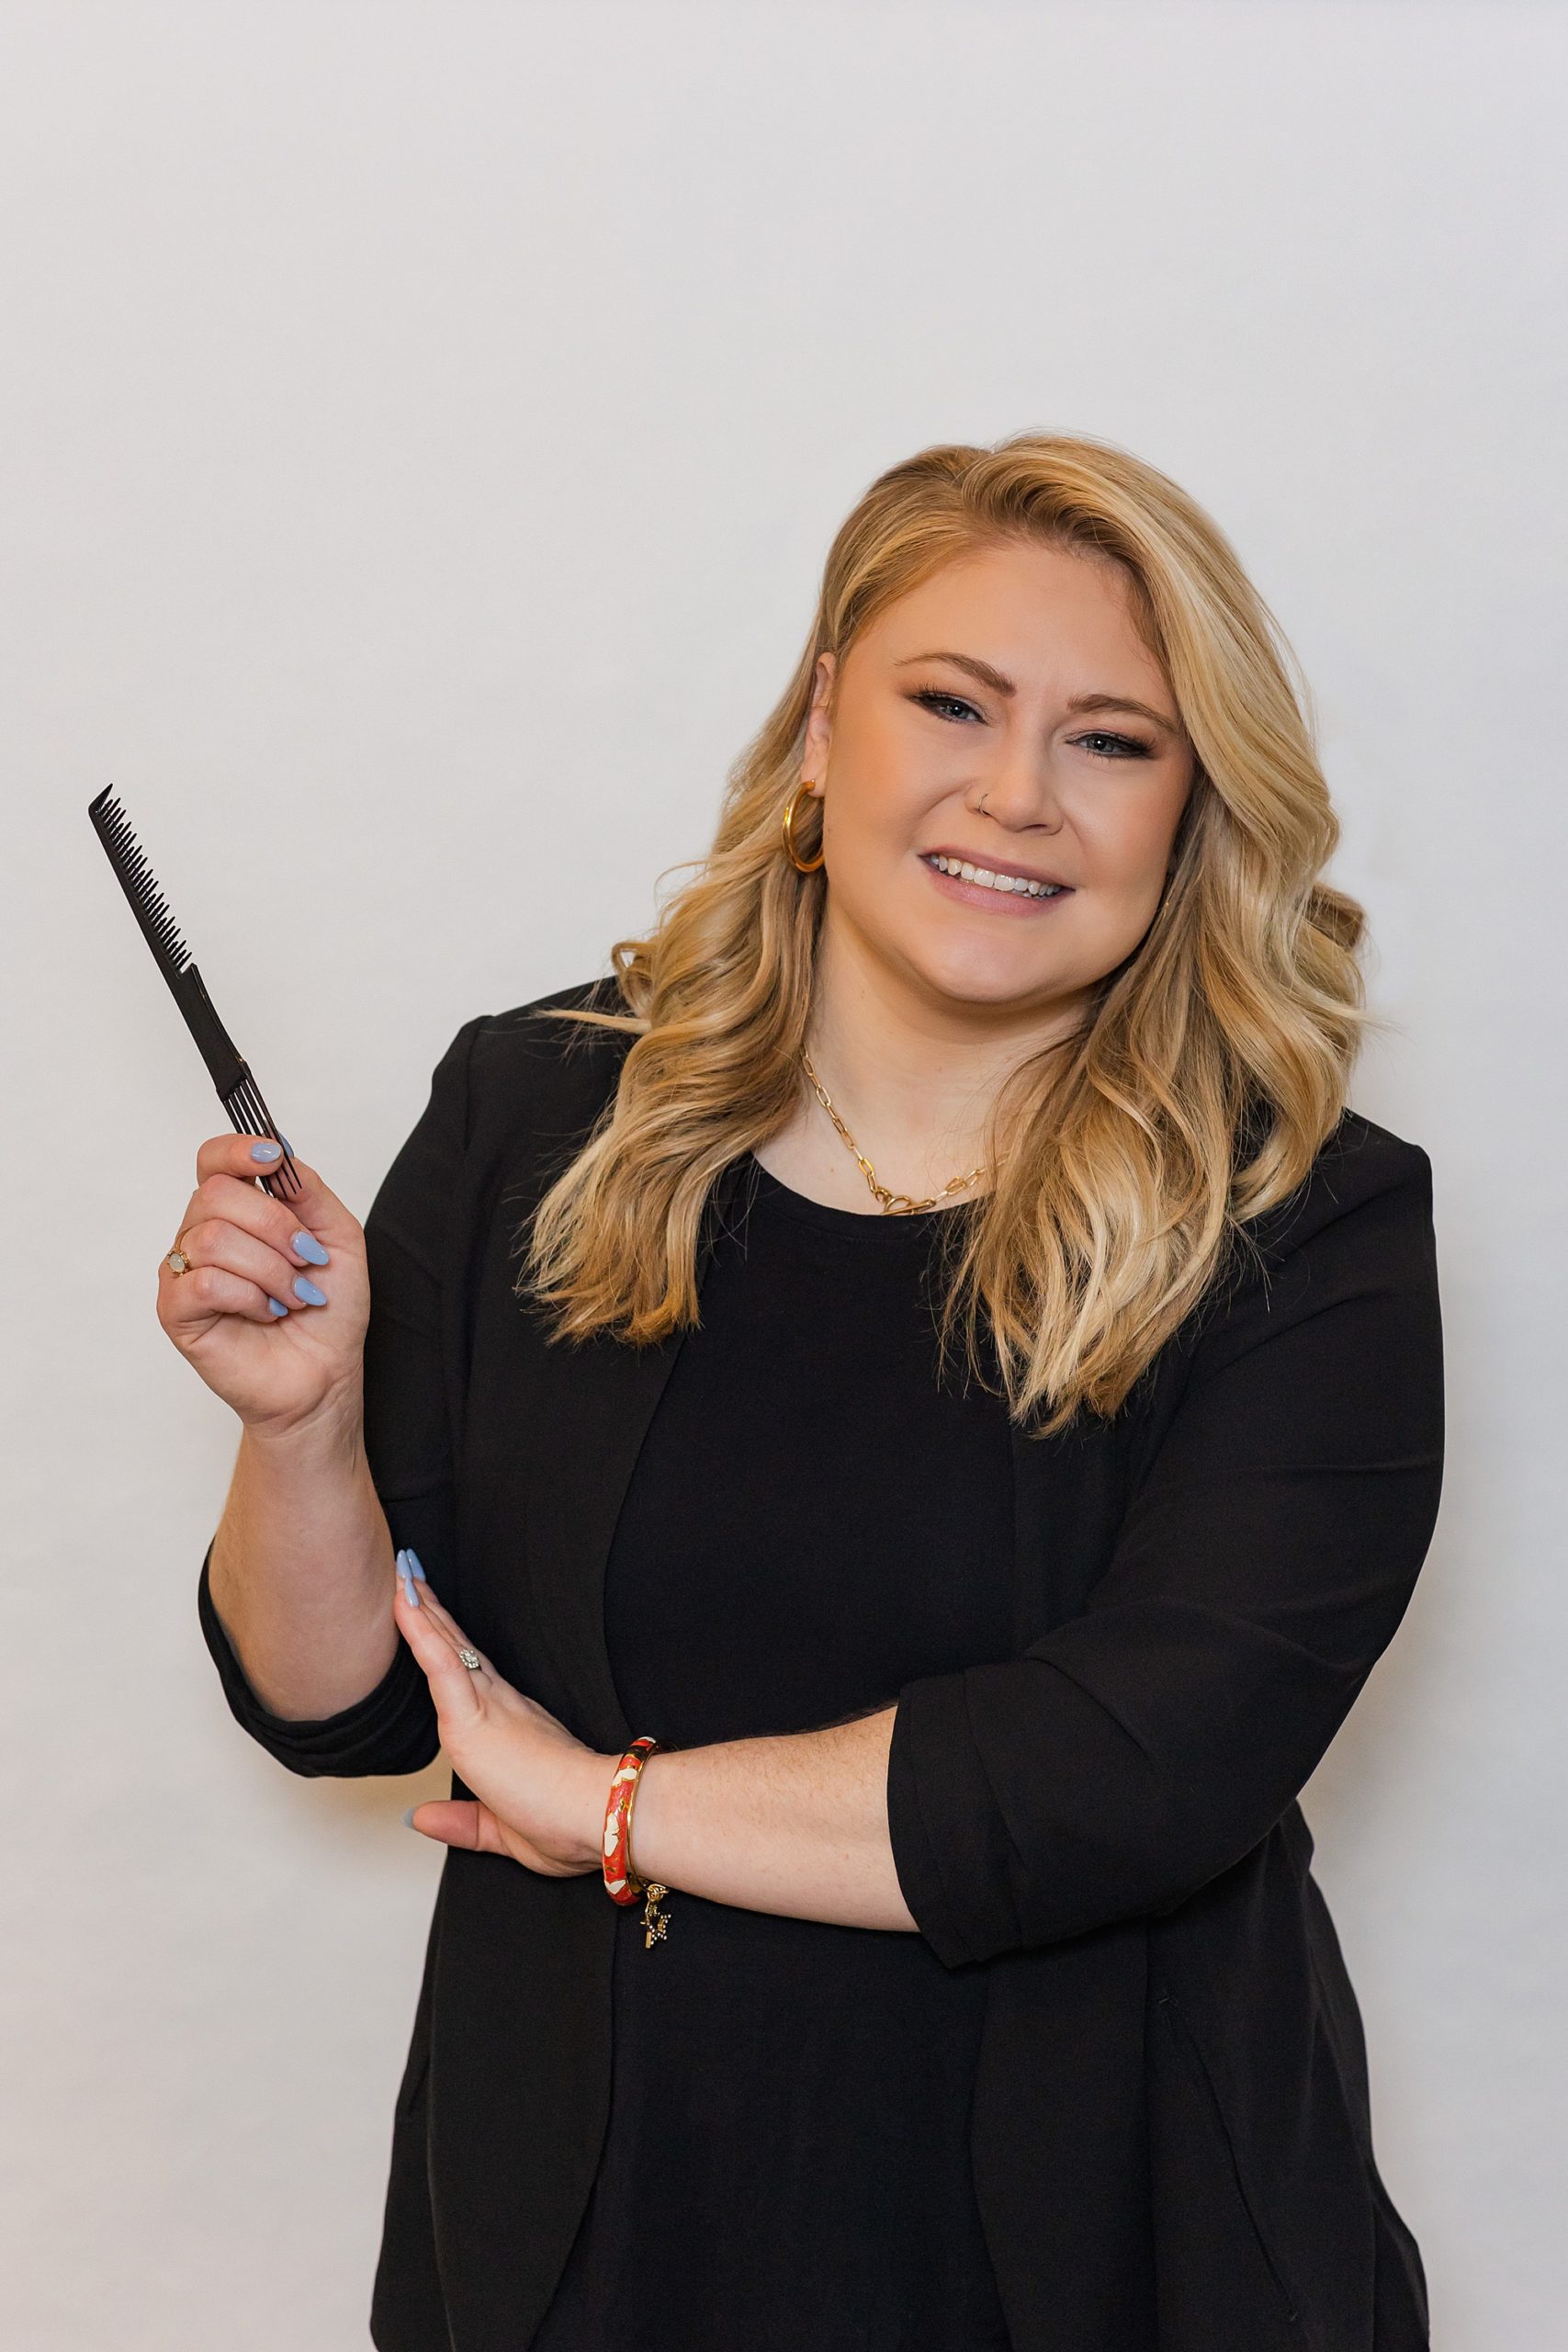 makeup artist holds product during headshot